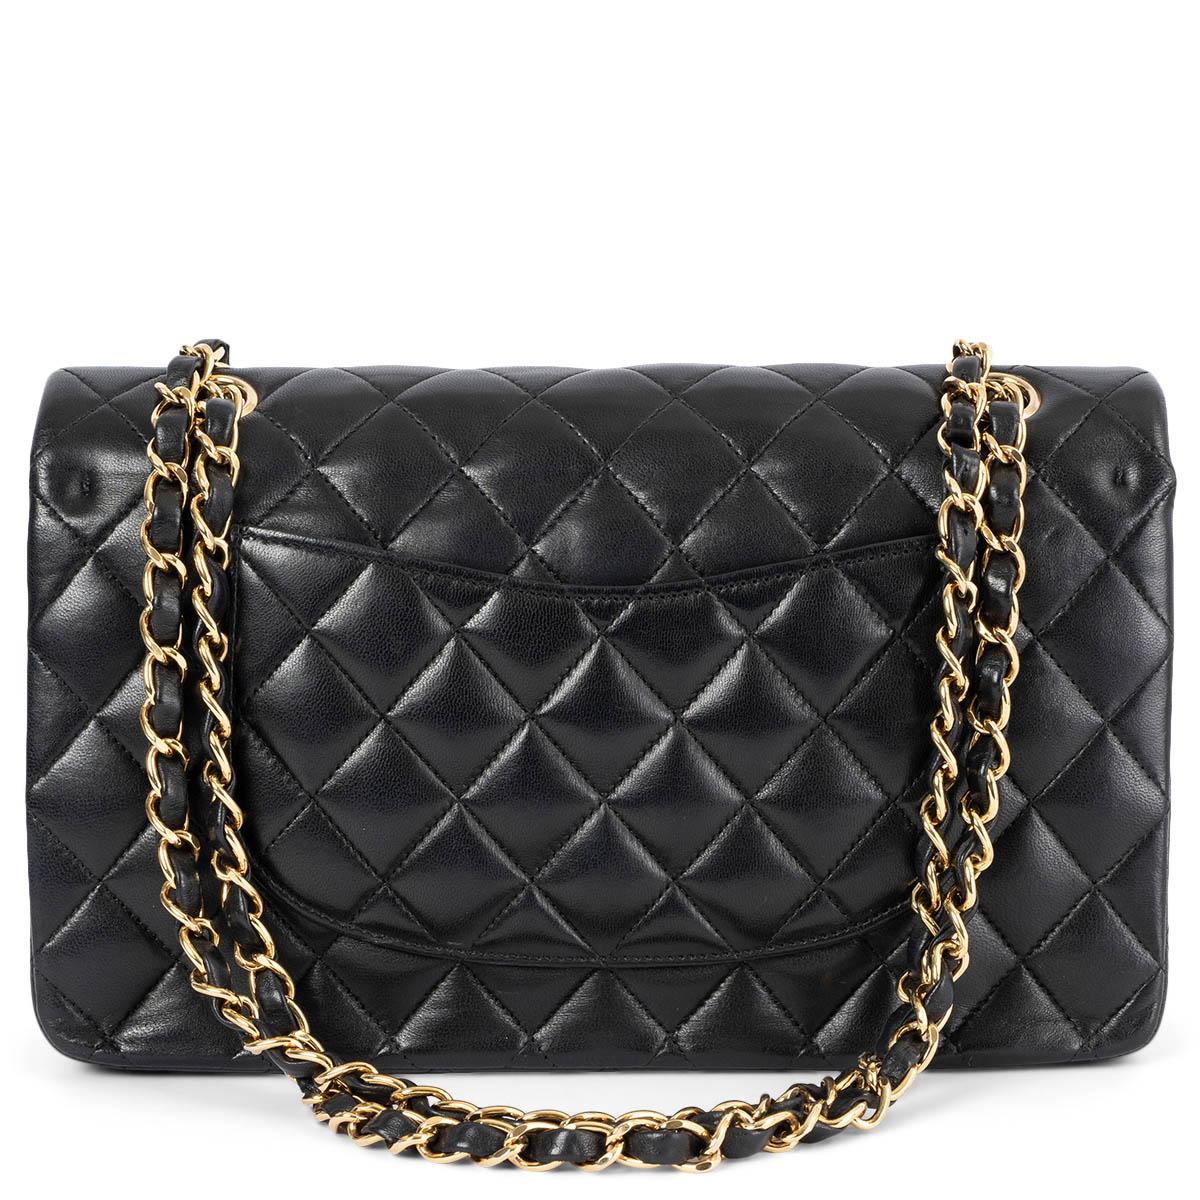 Black CHANEL black quilted lambskin leather CLASSIC MEDIUM TIMELESS Shoulder Bag